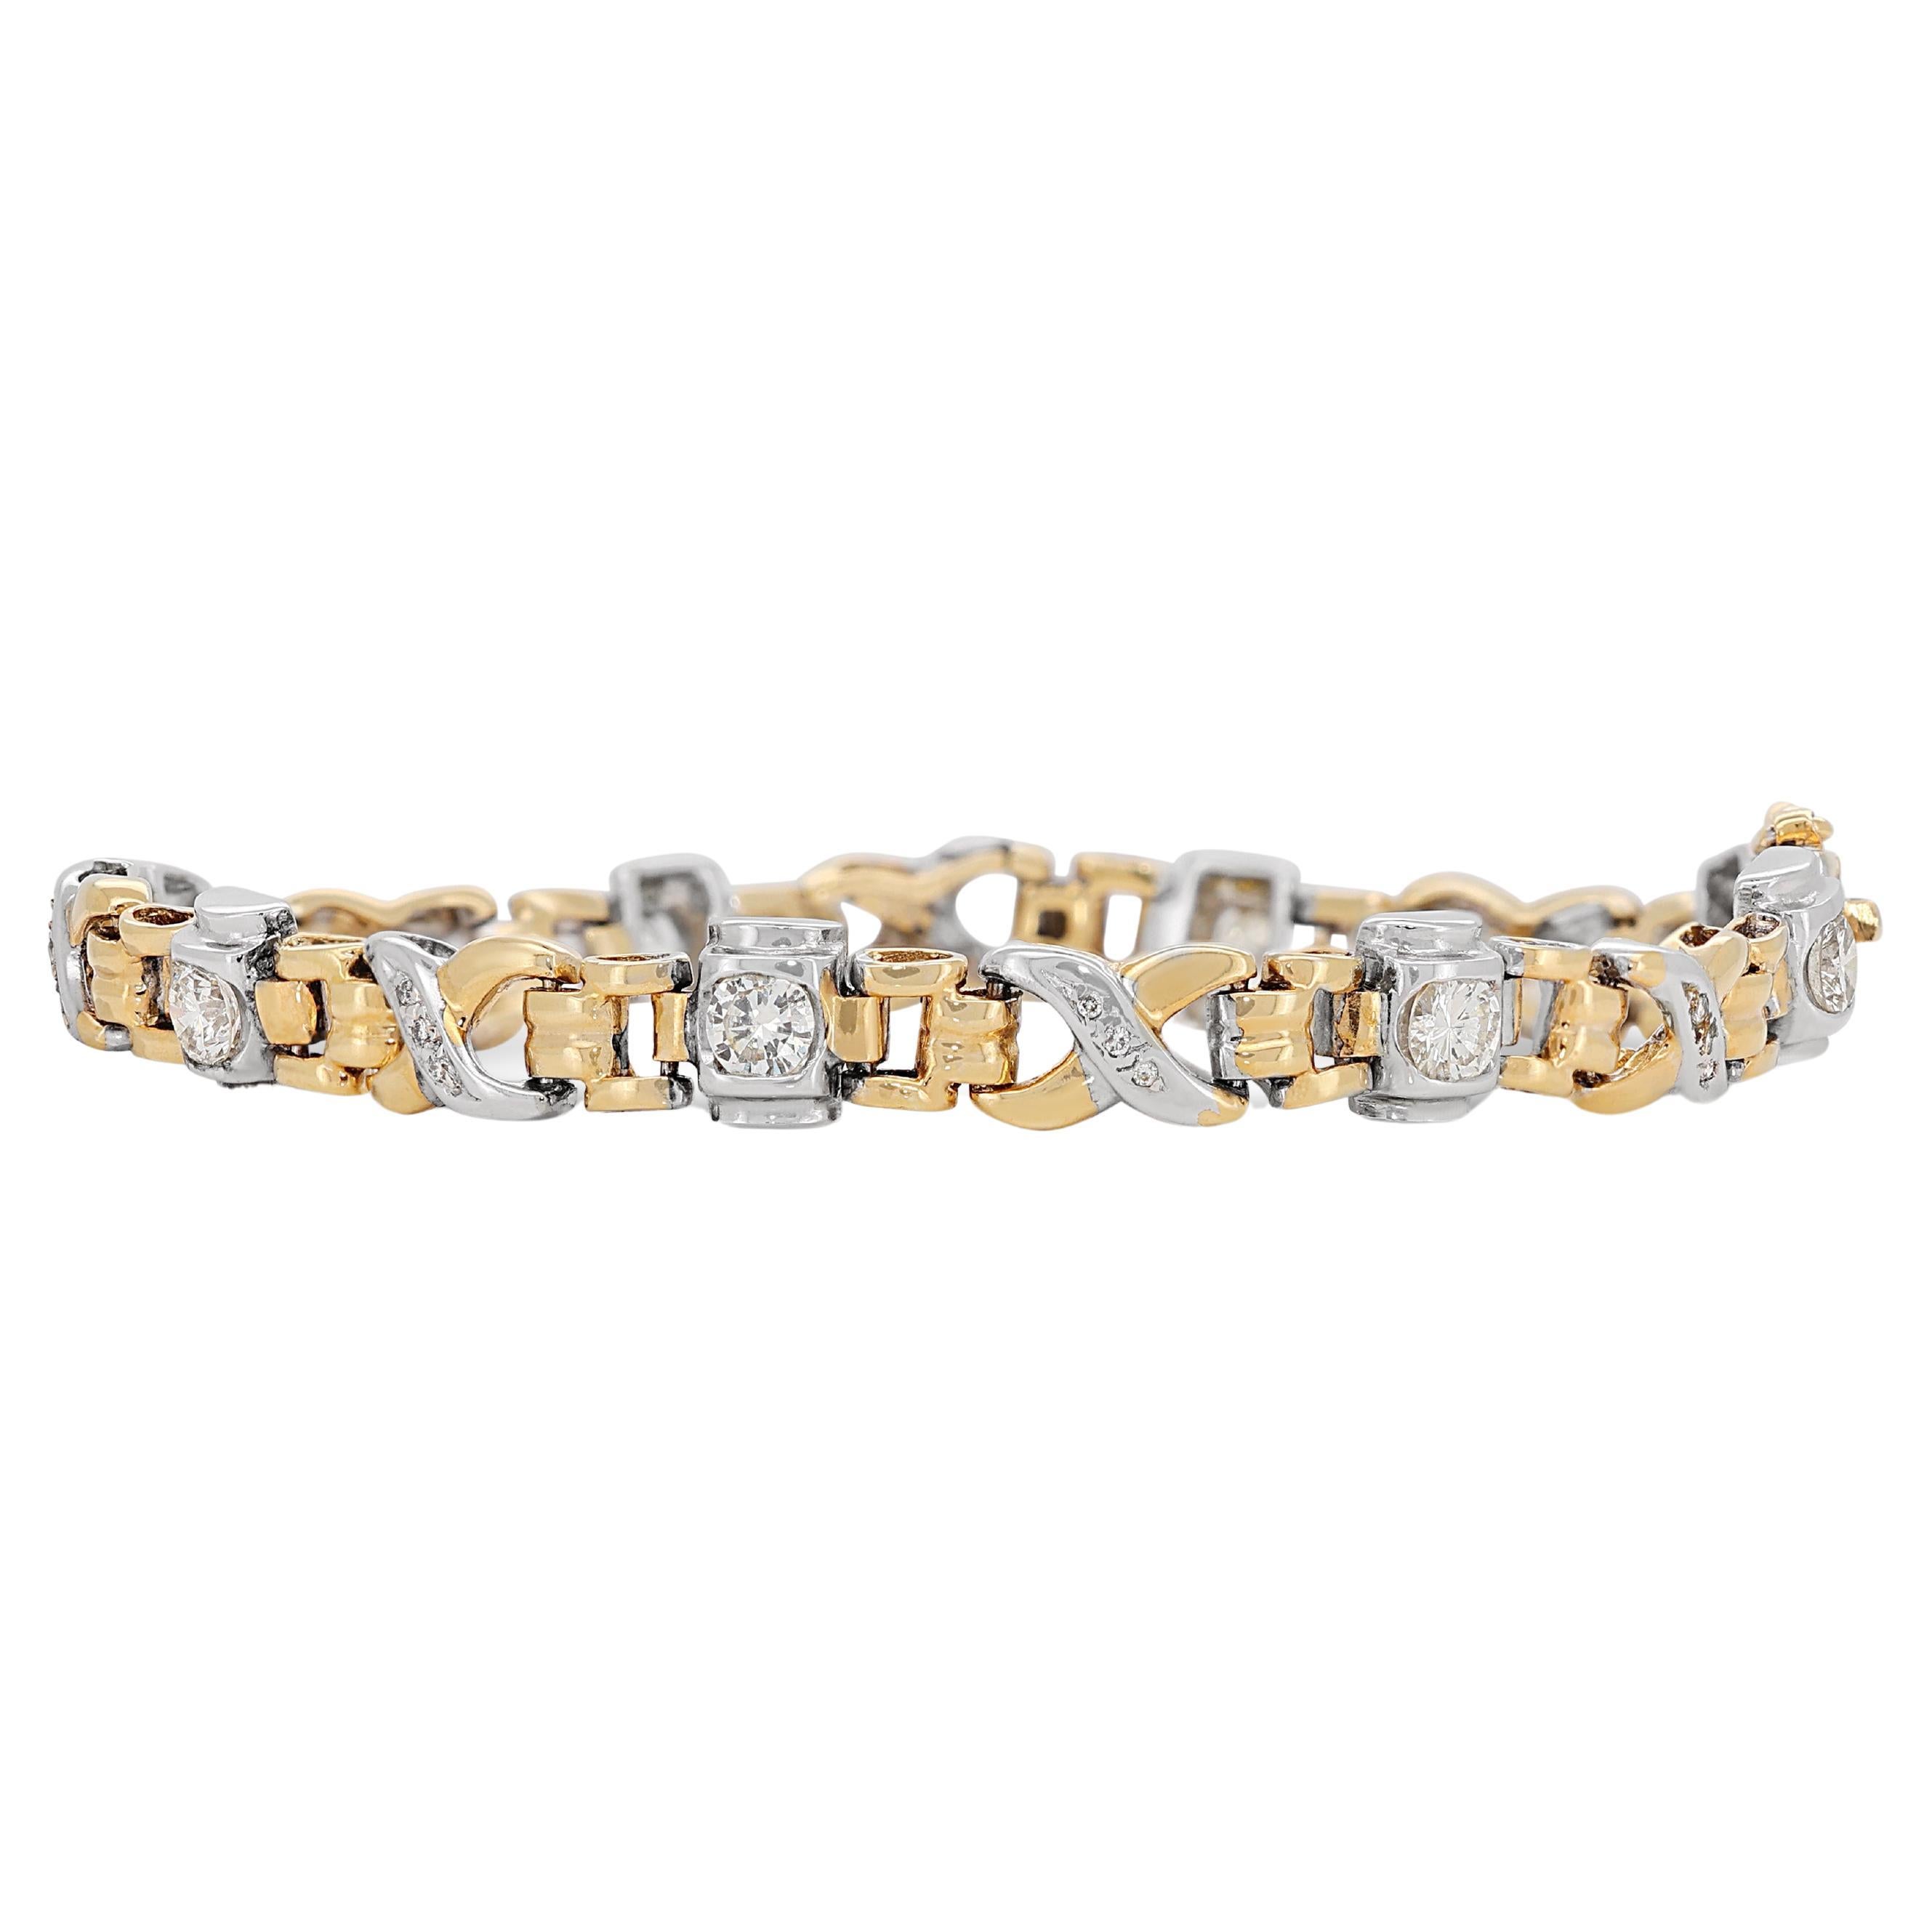 Exquisite 1.44ct Diamonds Bracelet in 18K White and Yellow Gold